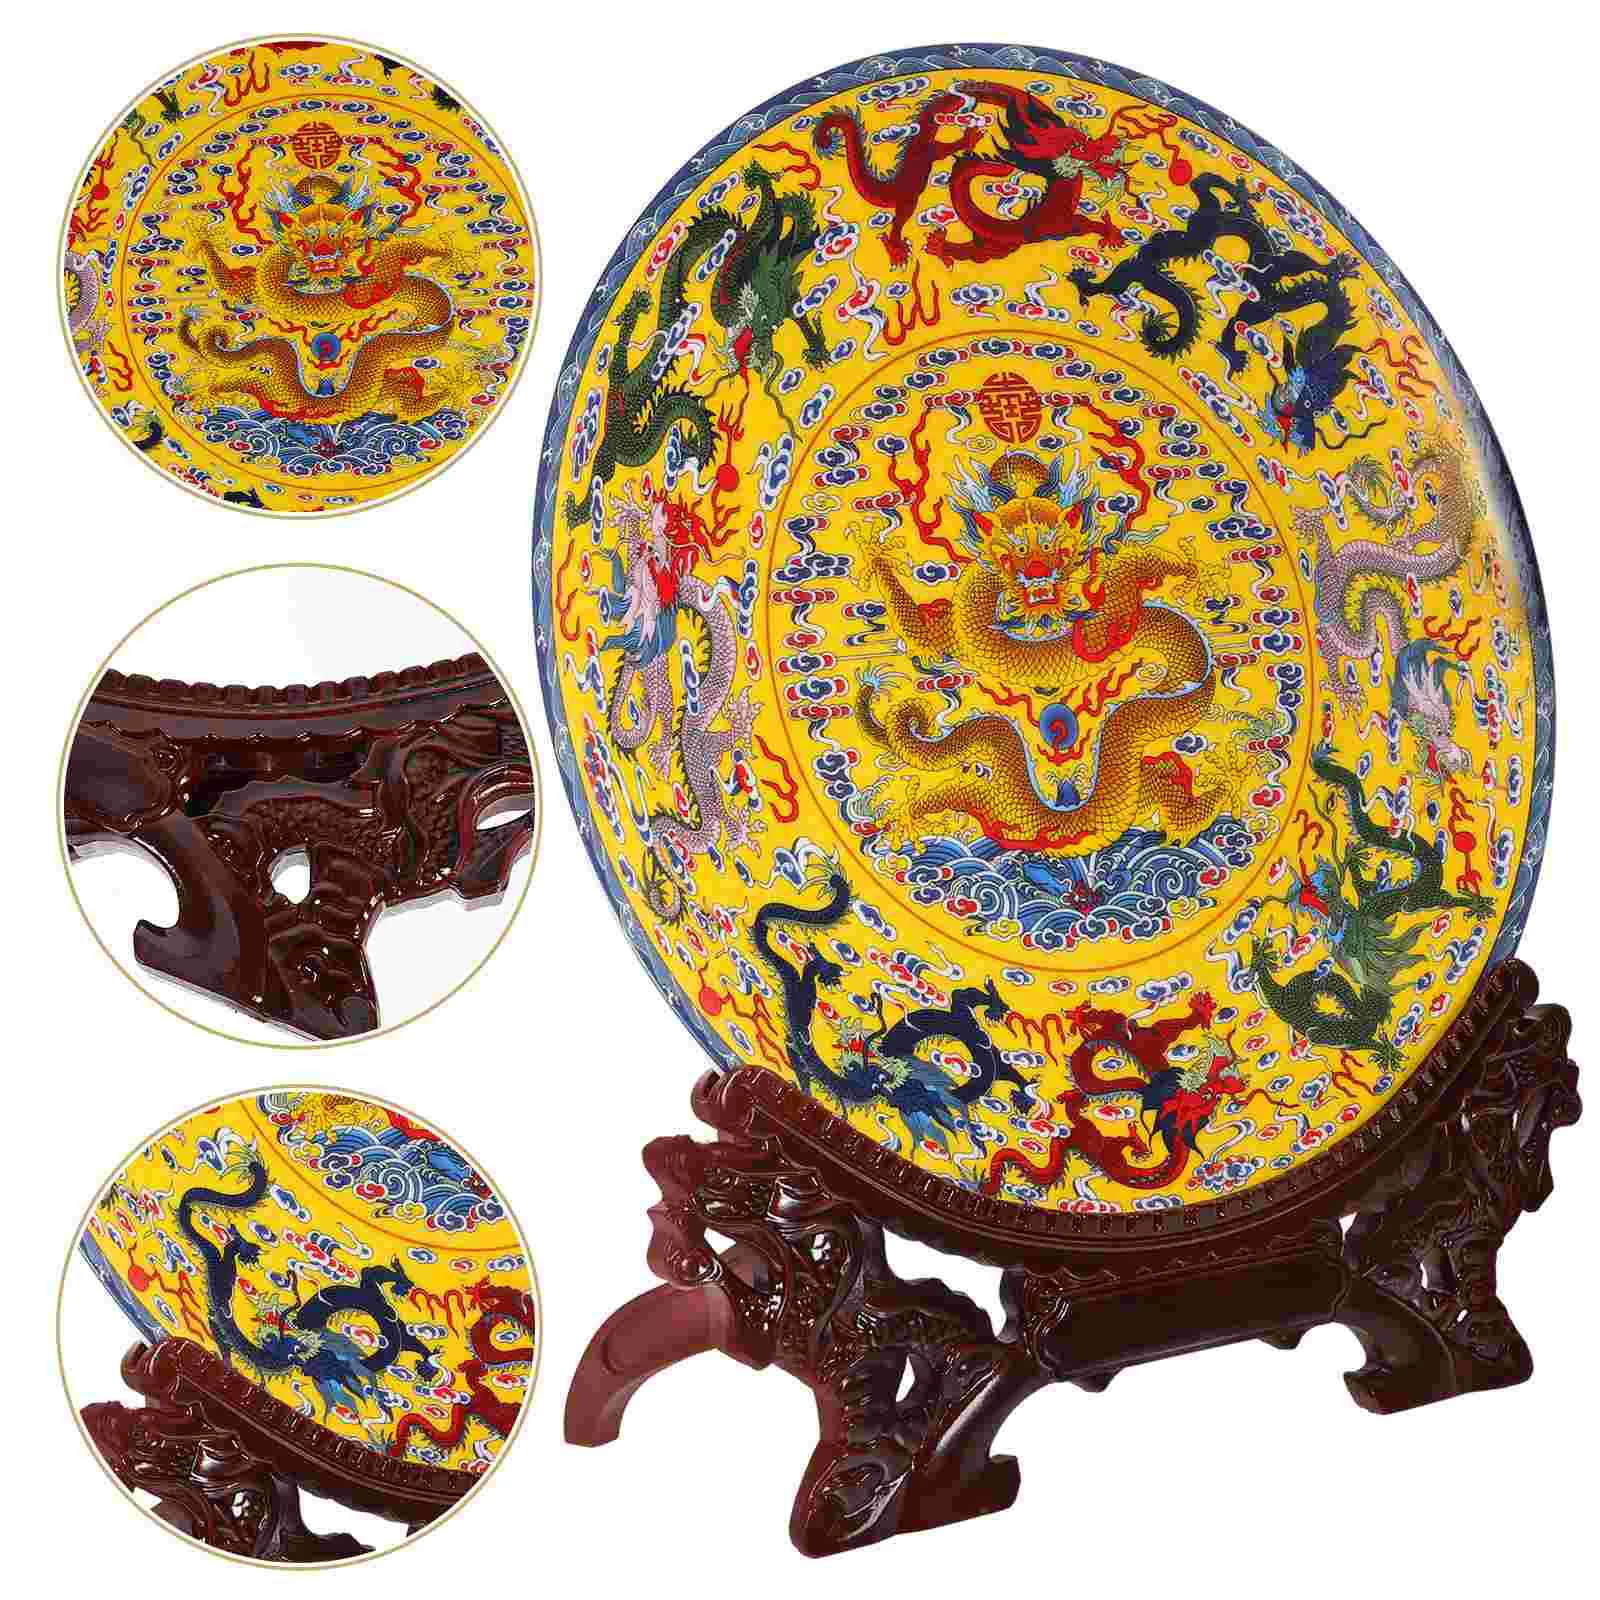 

Decor Decorative Ceramic Plate With Stand Decorate Plates For Home Food Dish Abs Office Ornament Artwork